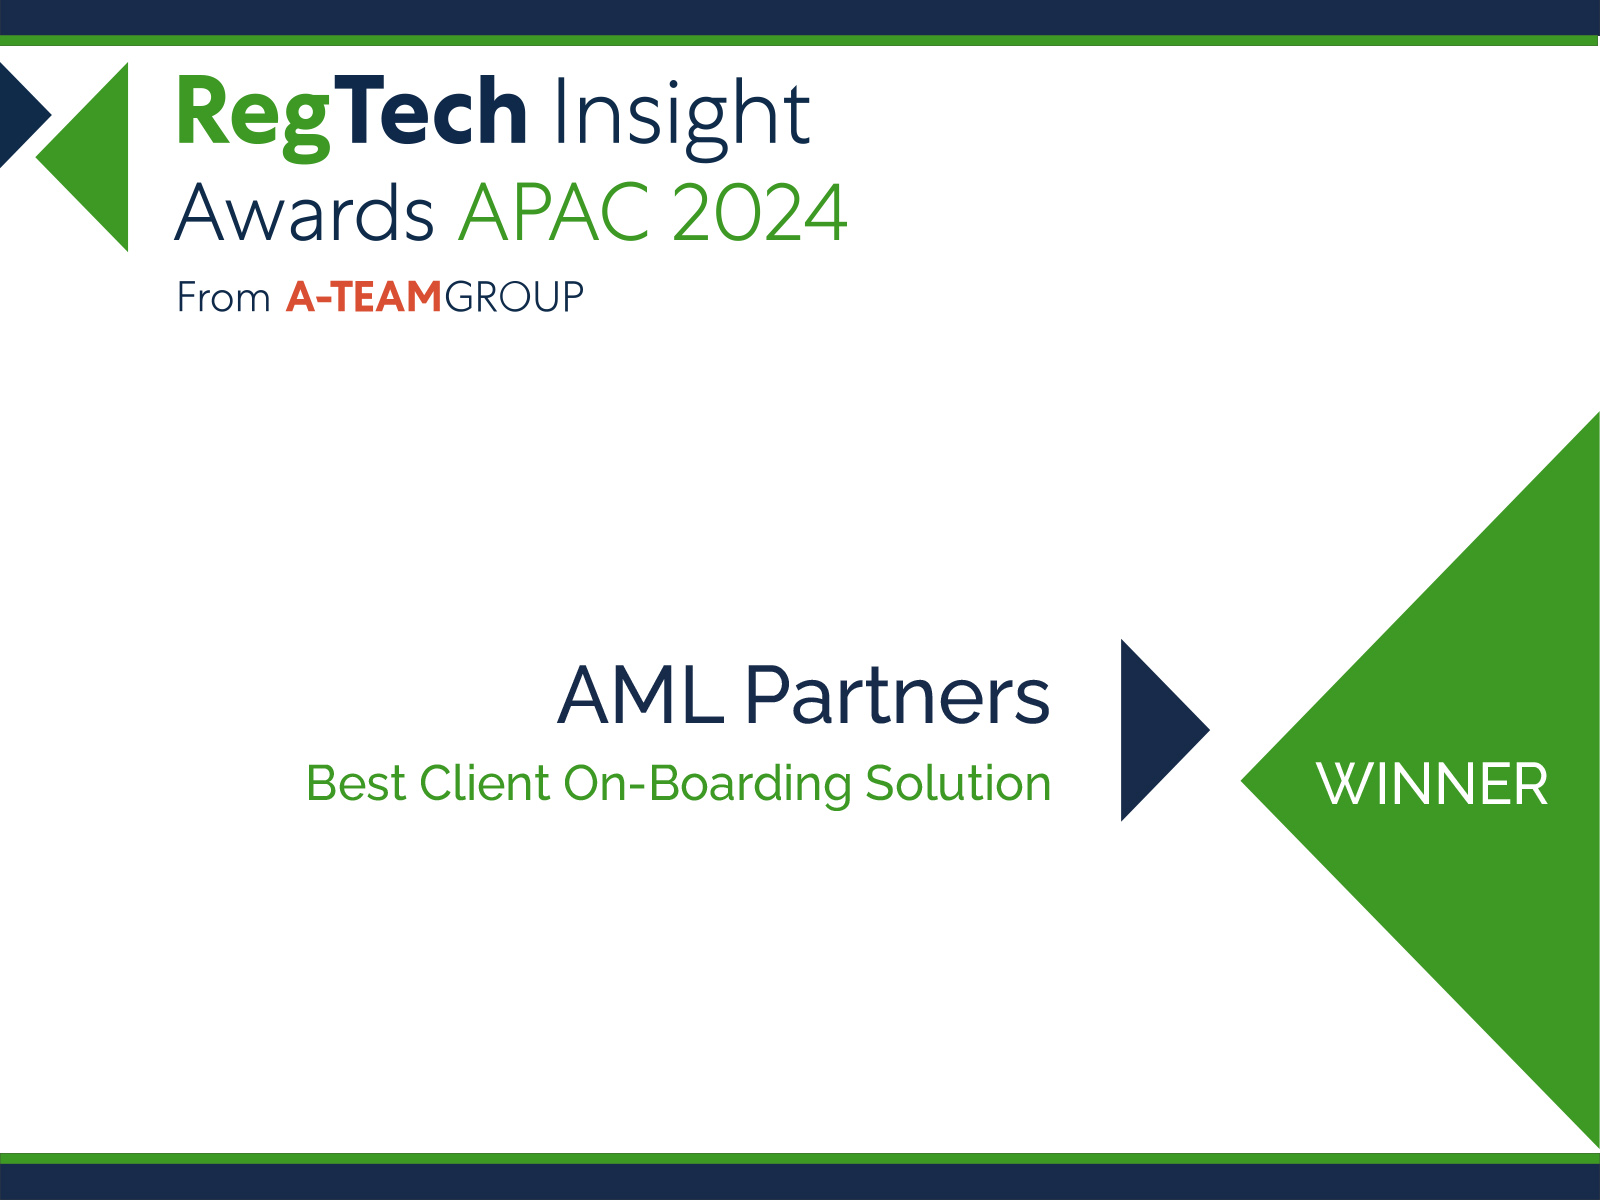 AML Partners' RegTechONE--RegTech platform for KYC onboarding and AML Compliance. Image is an award certificate to AML Partners for Best Client Onboarding at the RegTech Insight Awards APAC 2024.